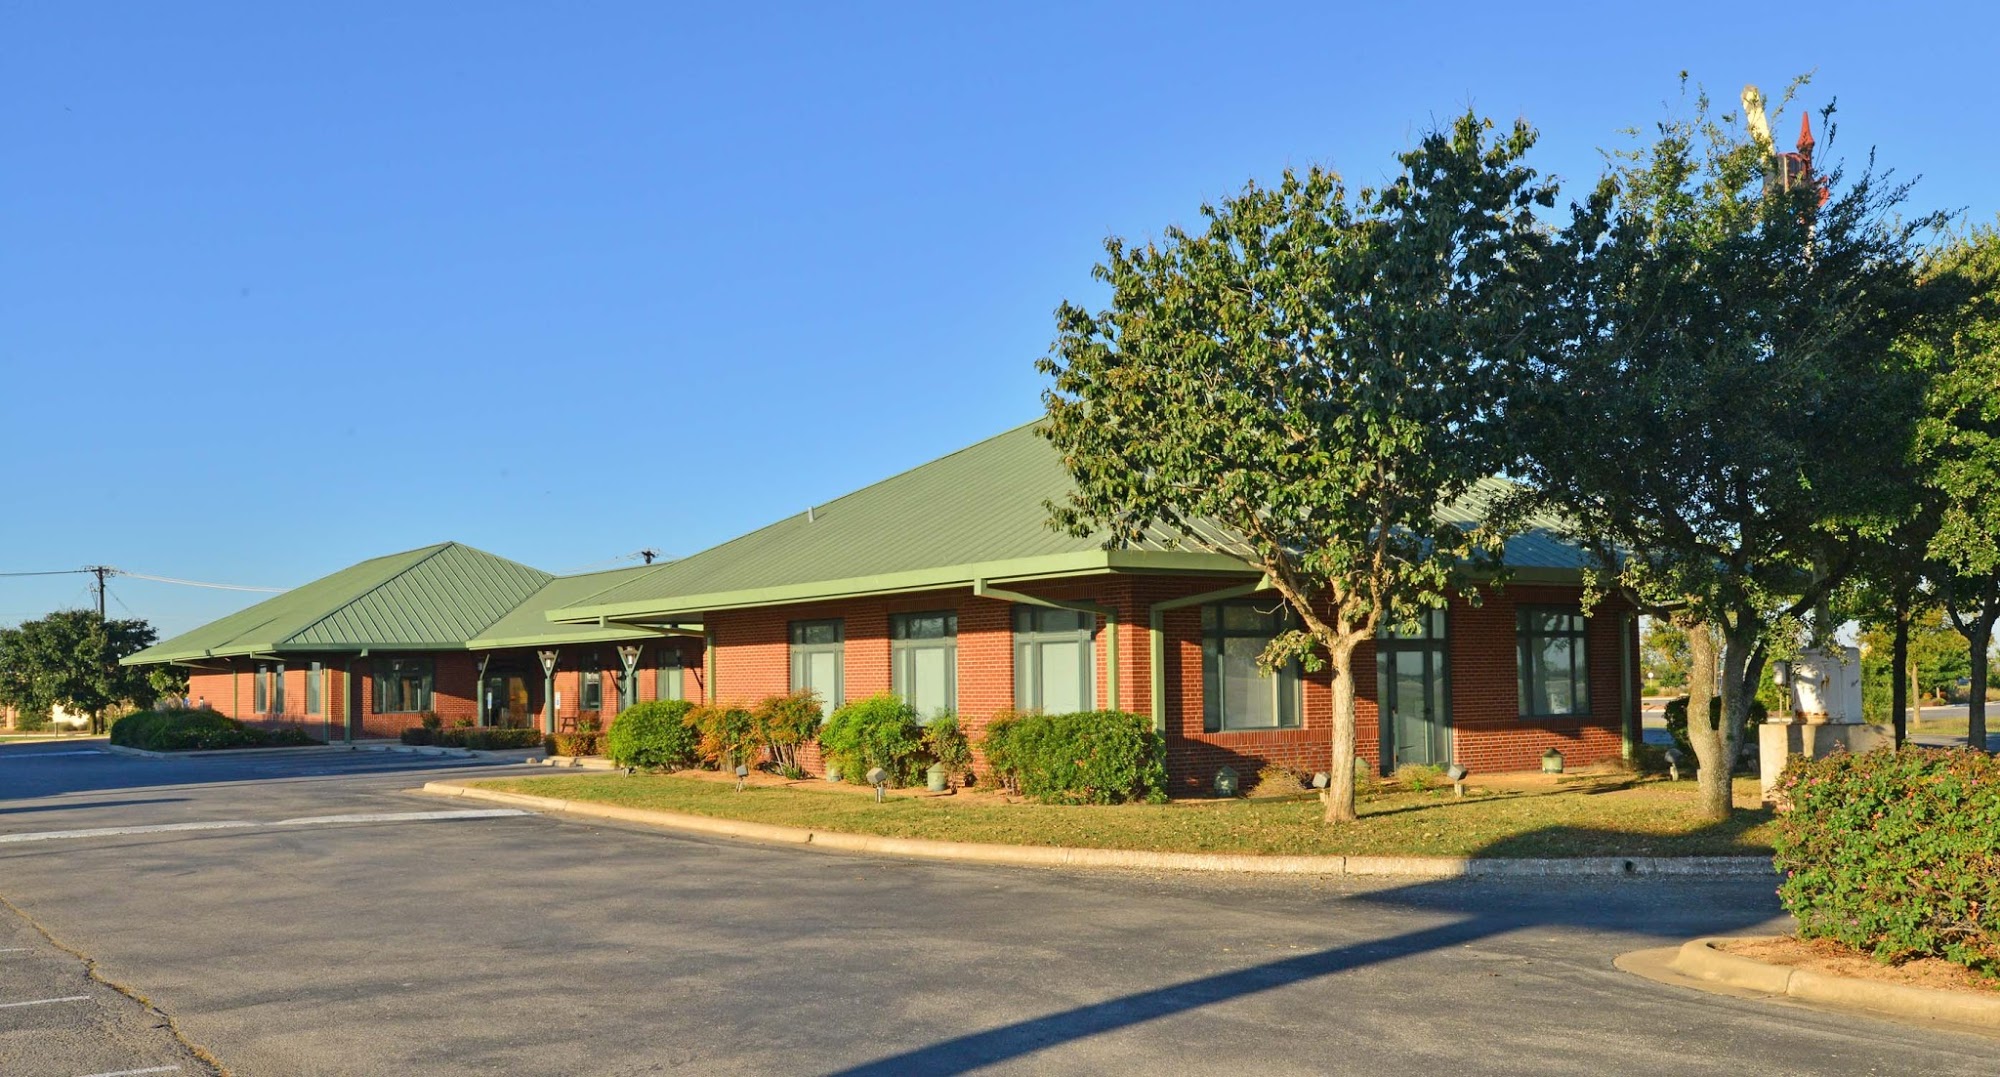 First National Bank of Bastrop